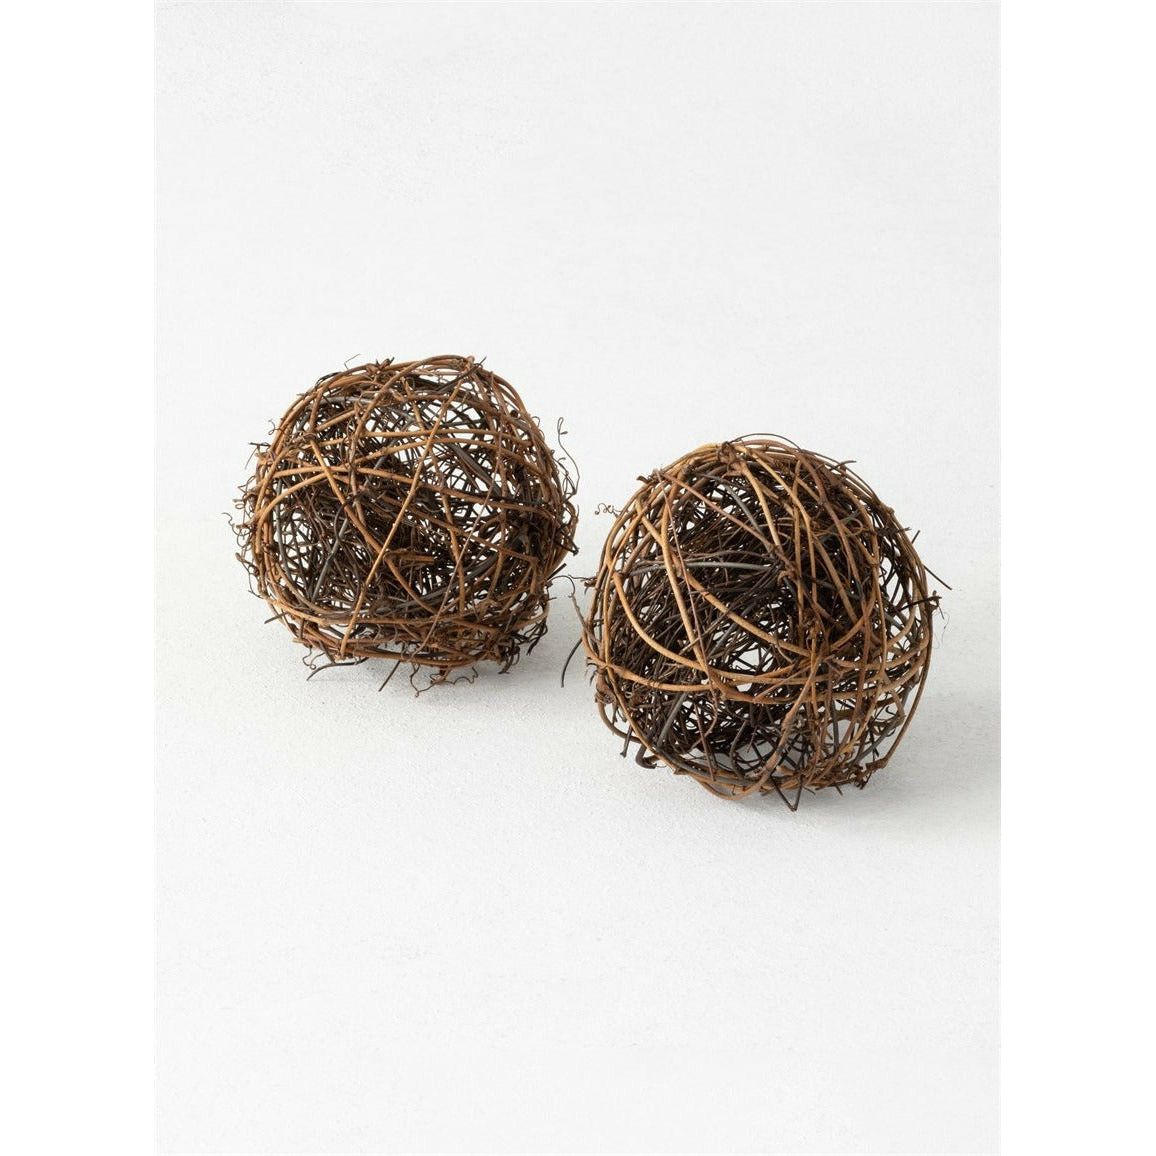 Decorative Artificial Dried Moss Balls with Vine